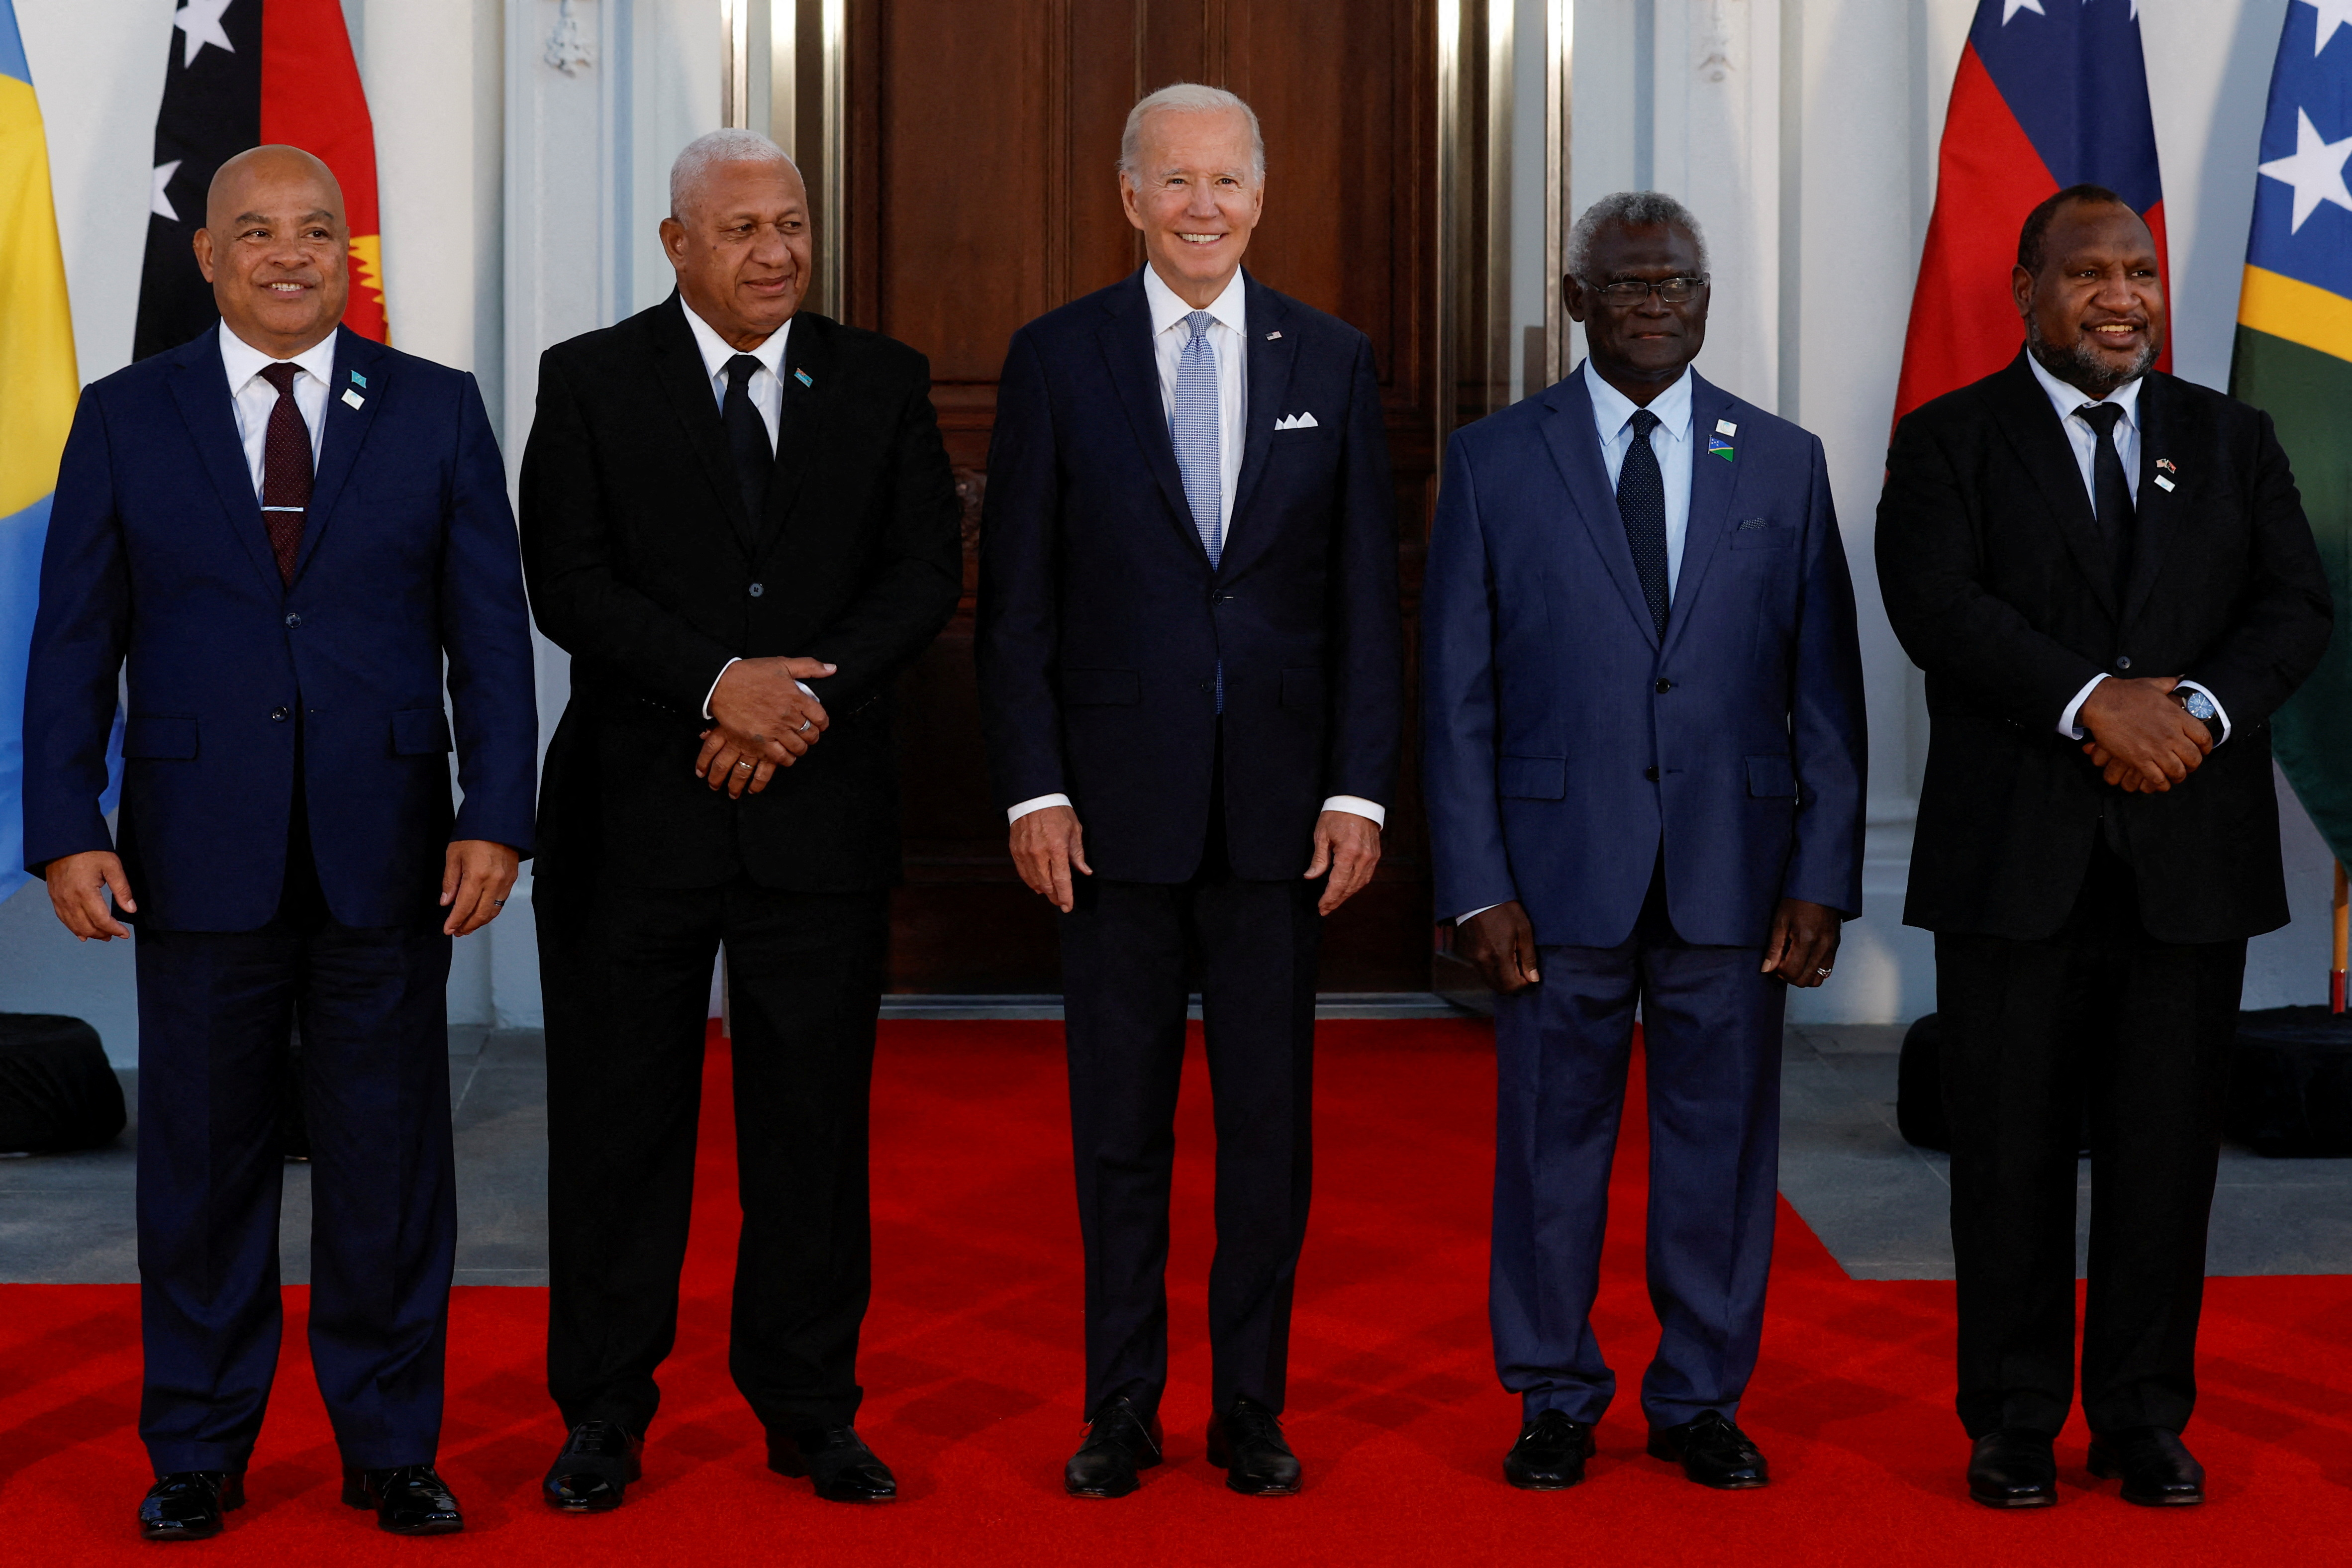 U.S. President Joe Biden welcomes leaders from the U.S.- Pacific Island Country Summit to a dinner at the White House in Washington